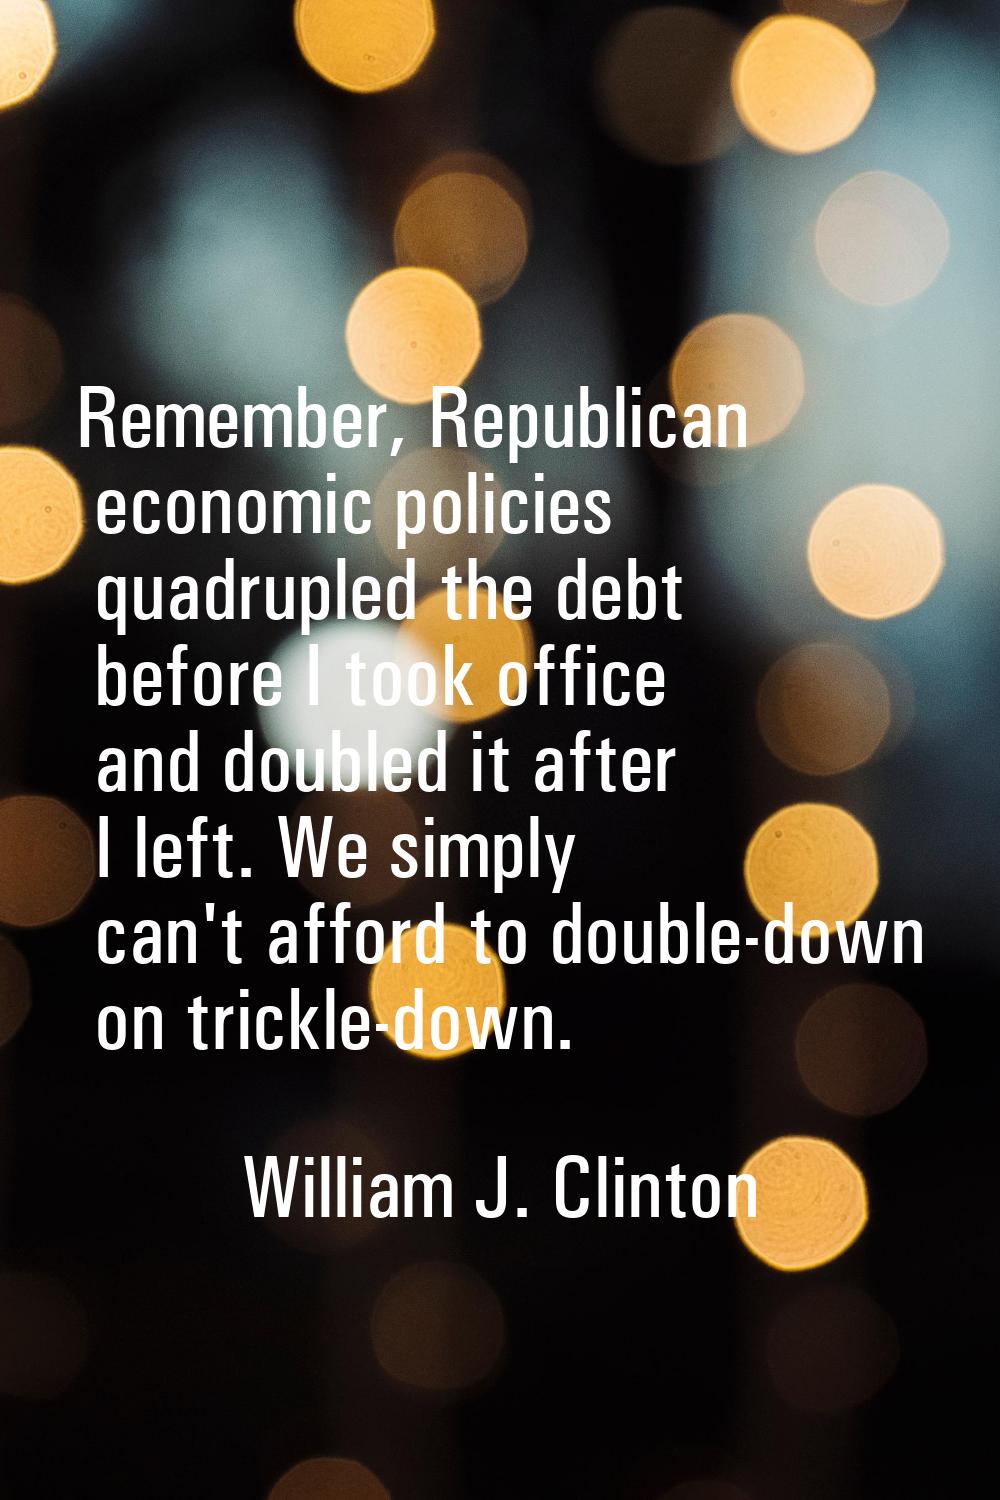 Remember, Republican economic policies quadrupled the debt before I took office and doubled it afte